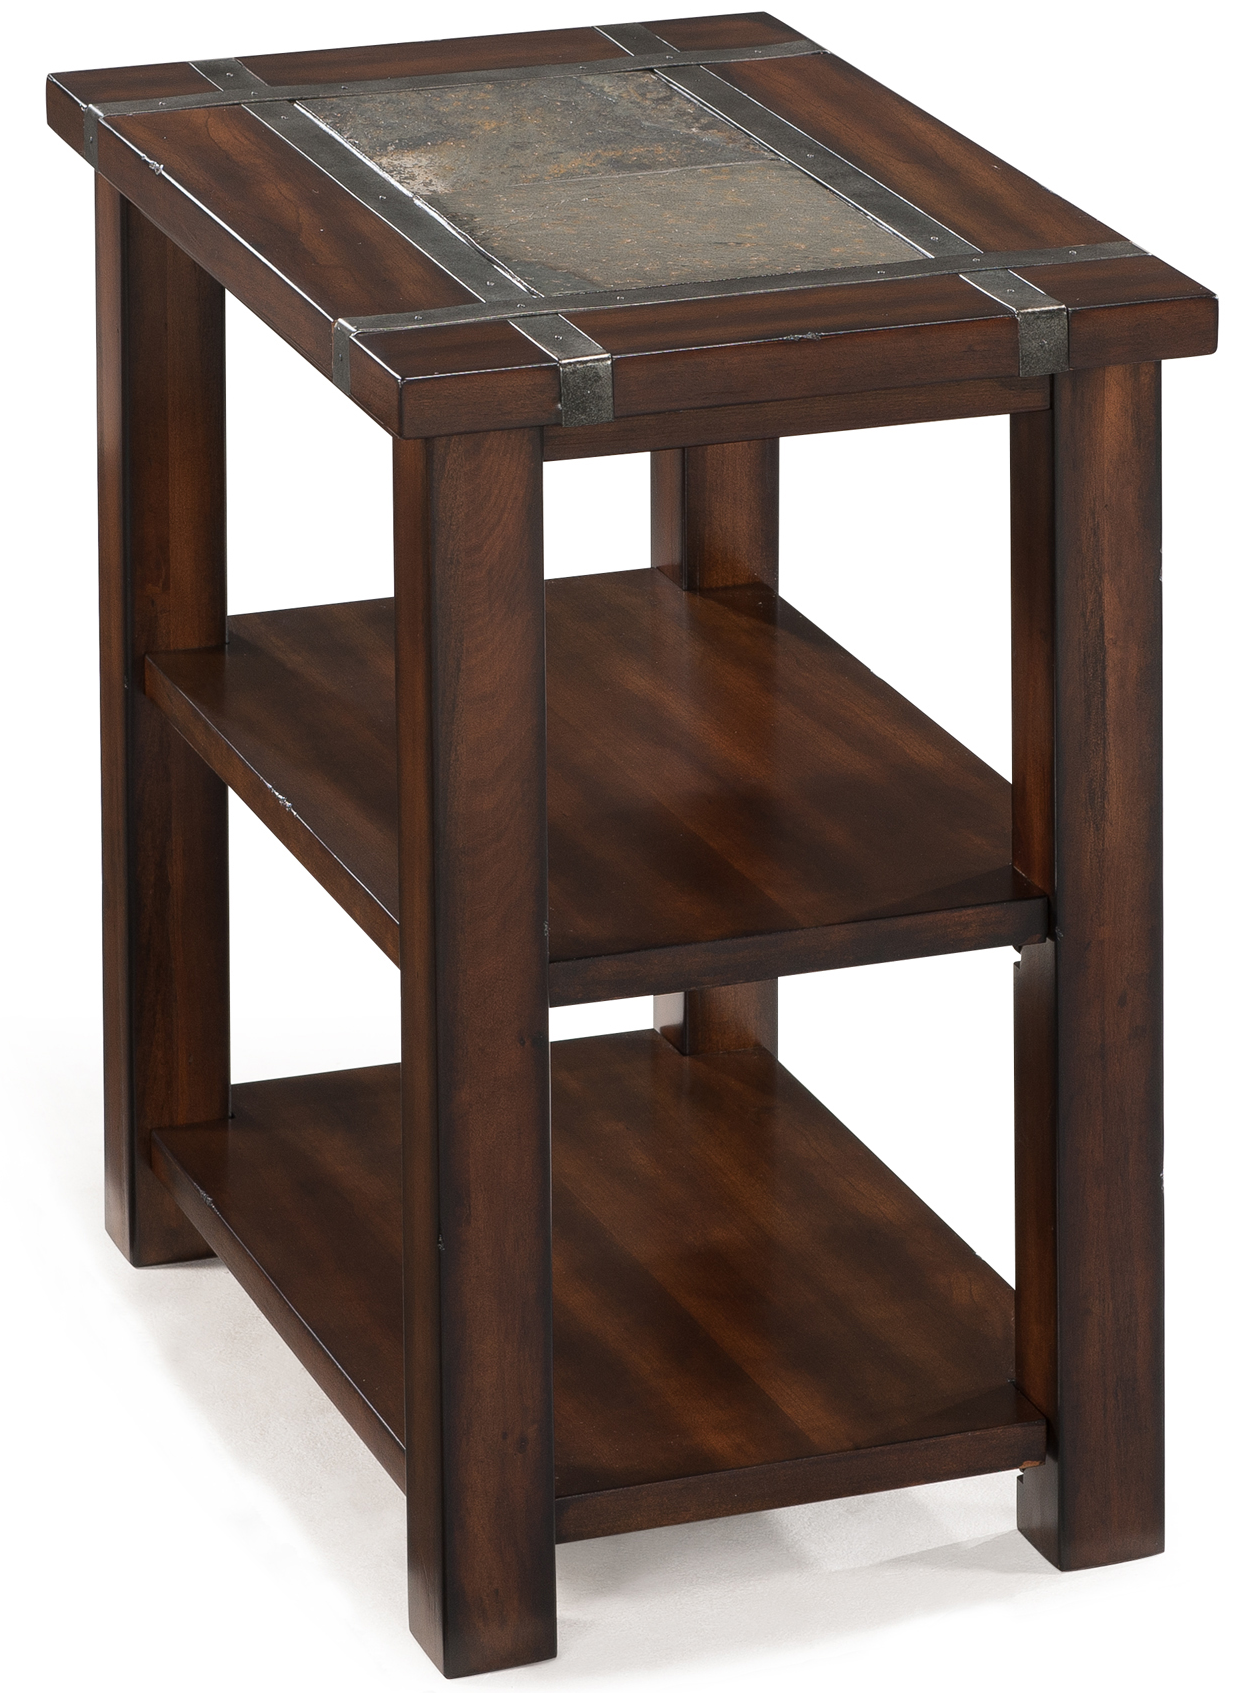 Magnussen® Home Roanake Rectangular Chairside End Table